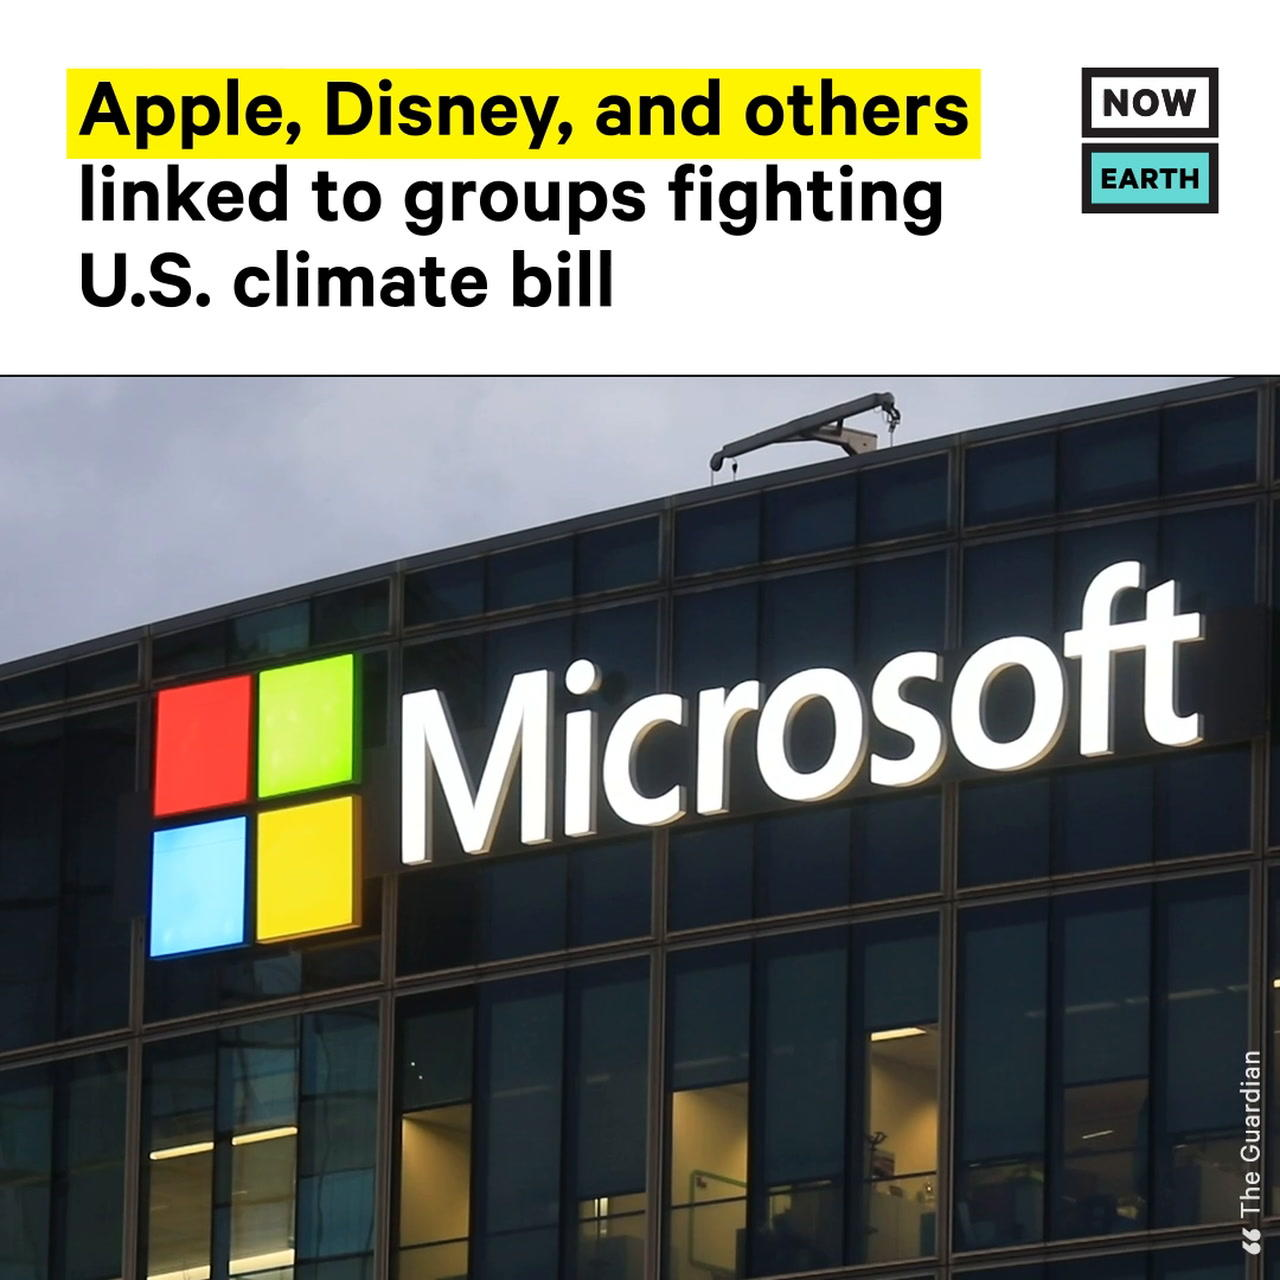 Execs from Companies Including Apple & Disney Linked to Groups Against Climate Bill